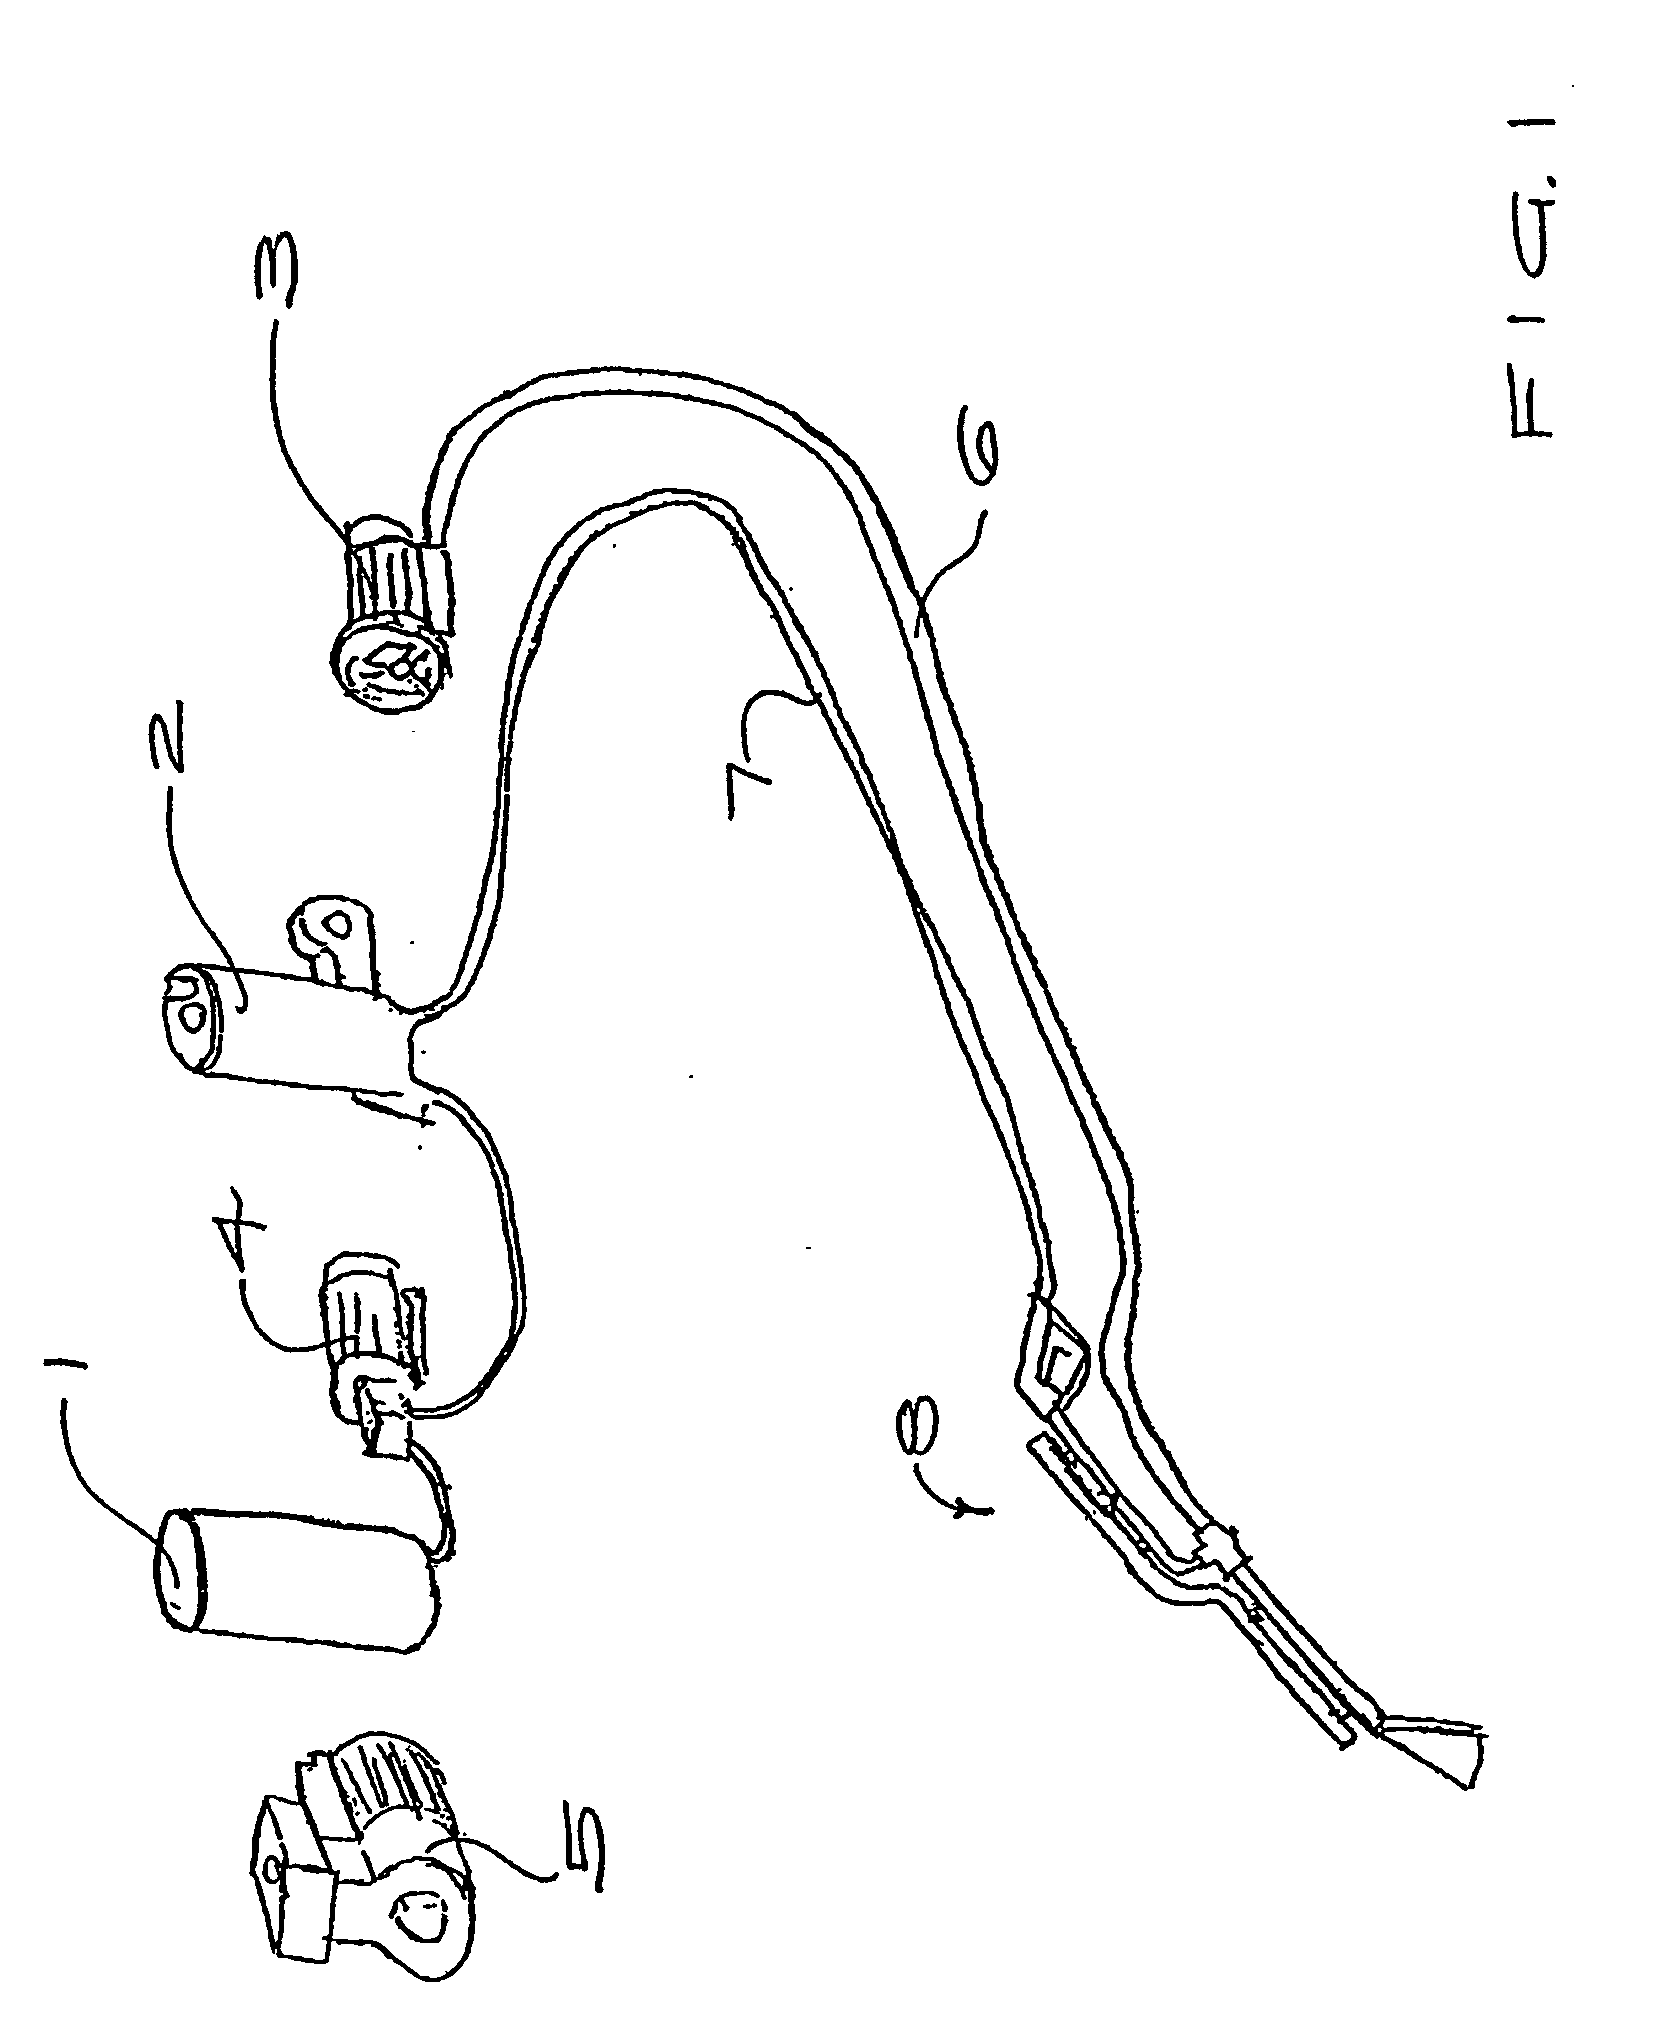 Method and apparatus for weed control with hot foam